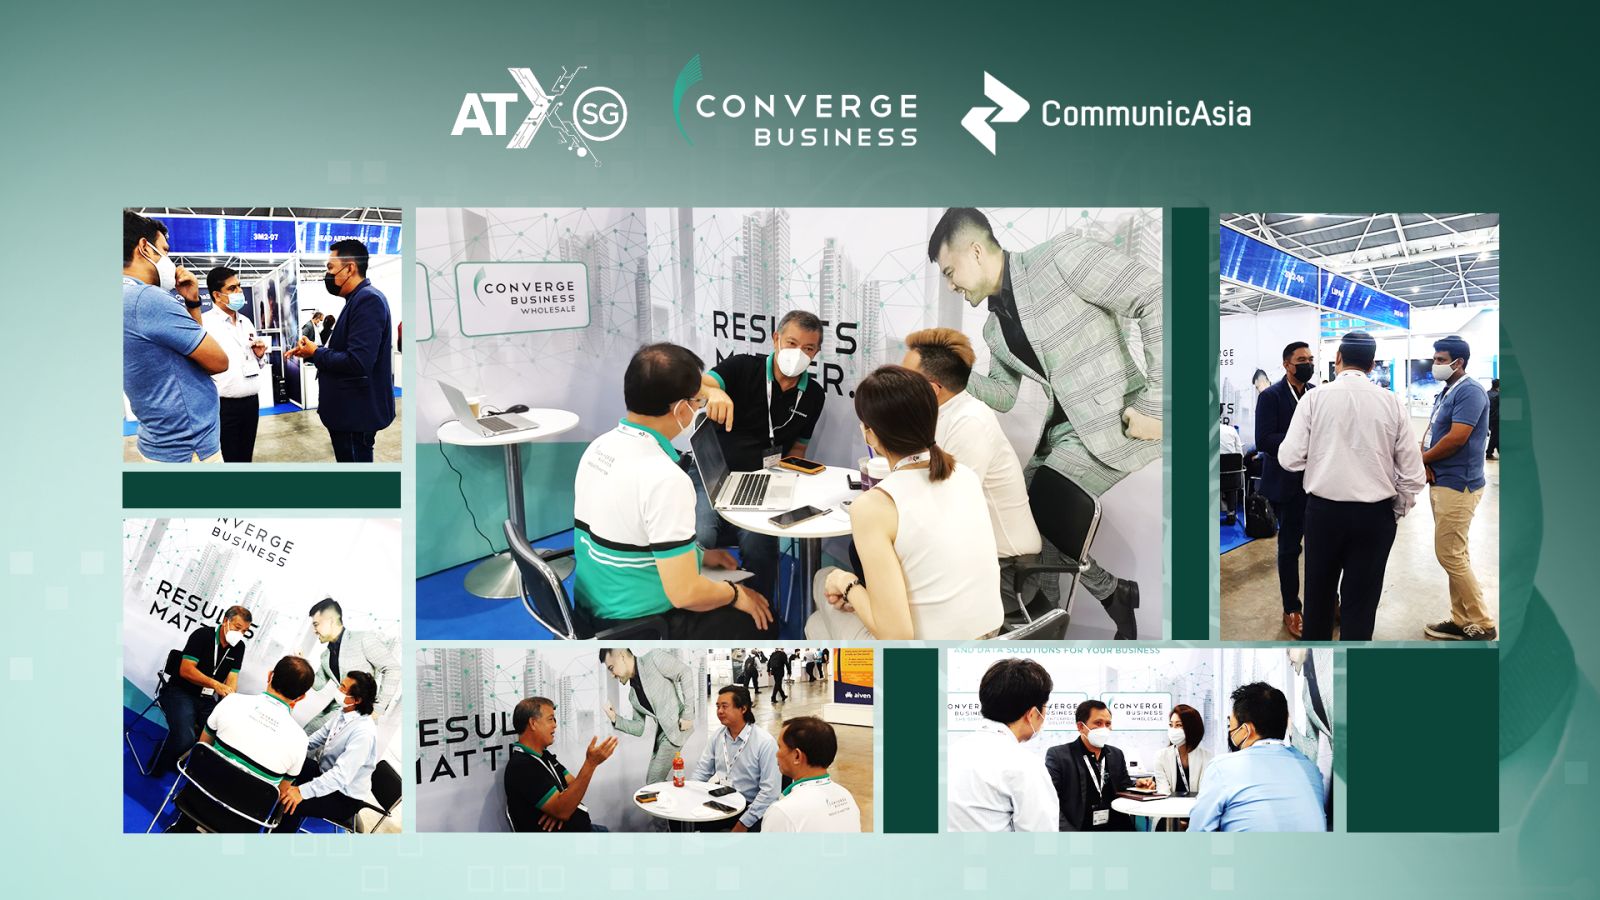 Converge is poised to expand its reach not just to the rest of the Philippines but in Asia and the US